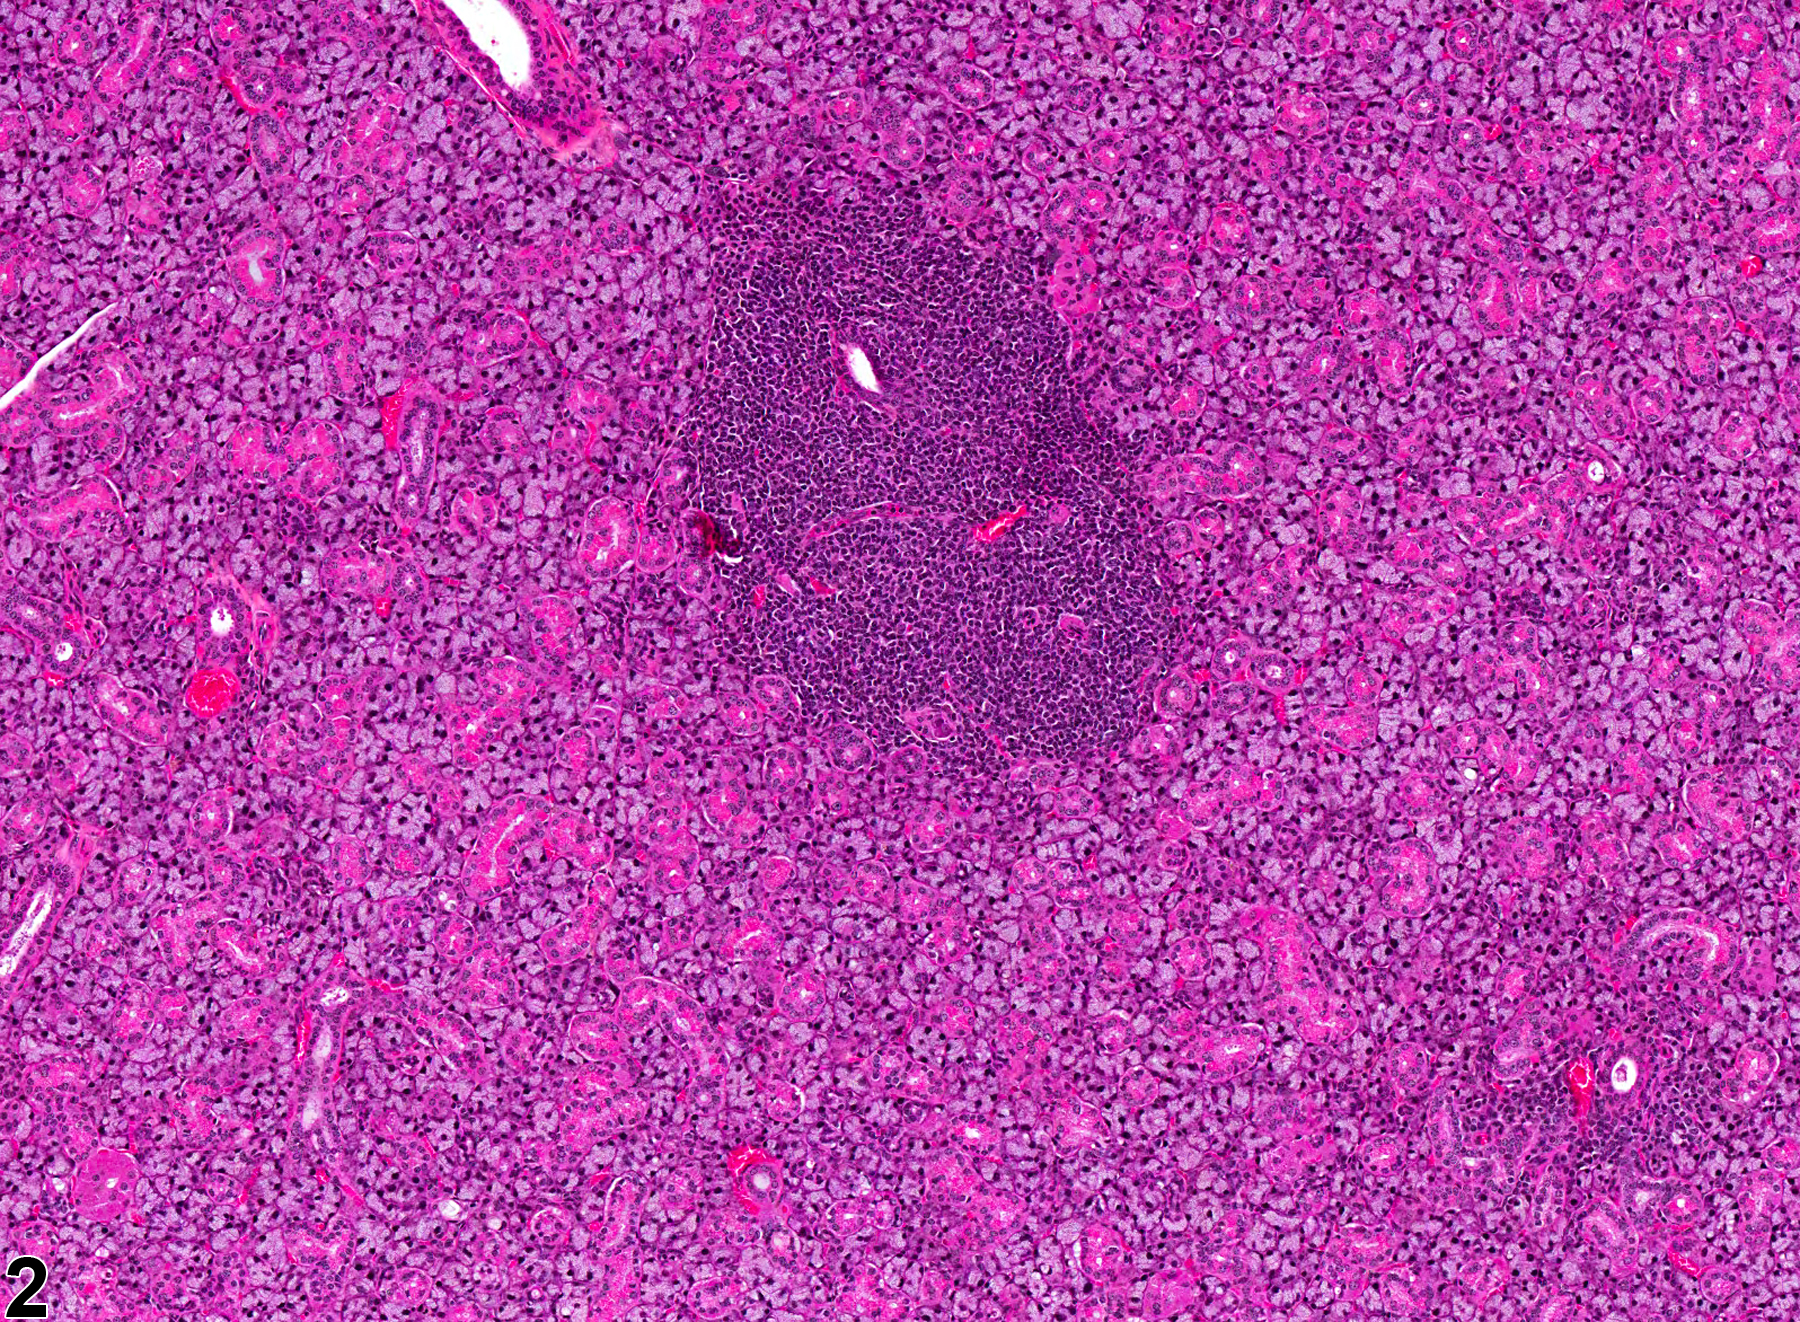 Image of infiltration cellular  in the salivary gland from a female B6C3F1 mouse in a chronic study